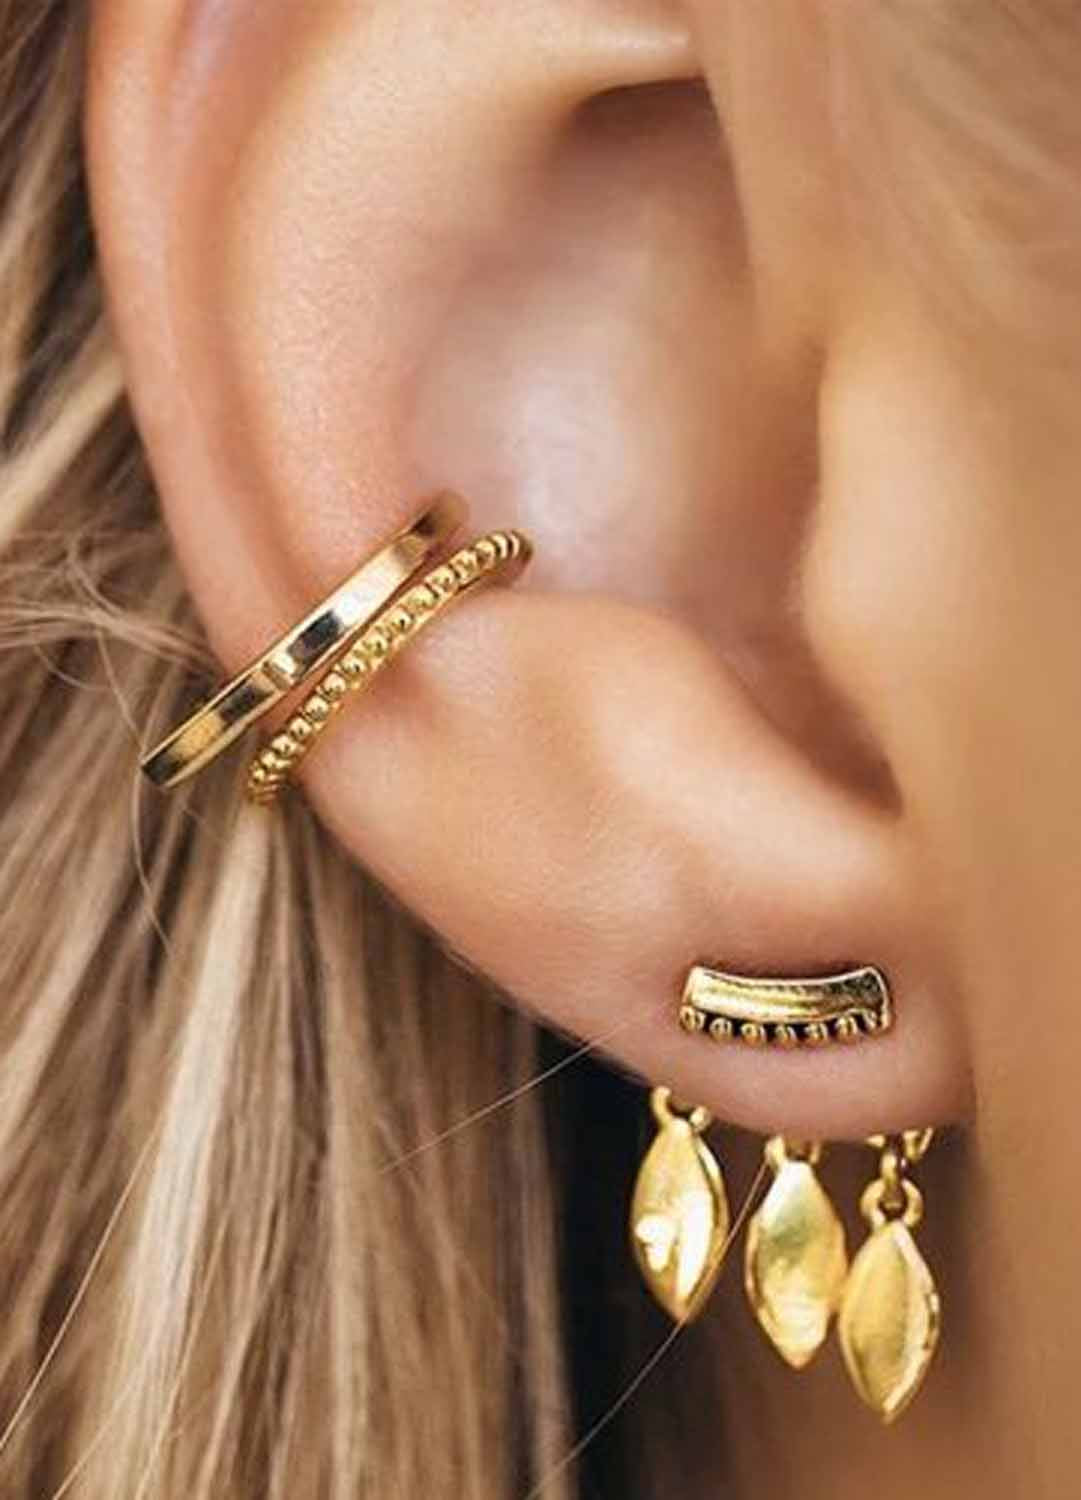 Cute SImple Ear Piercing Ideas at MyBodiArt.com -  All the Way Up Gold Conch Earring Ring